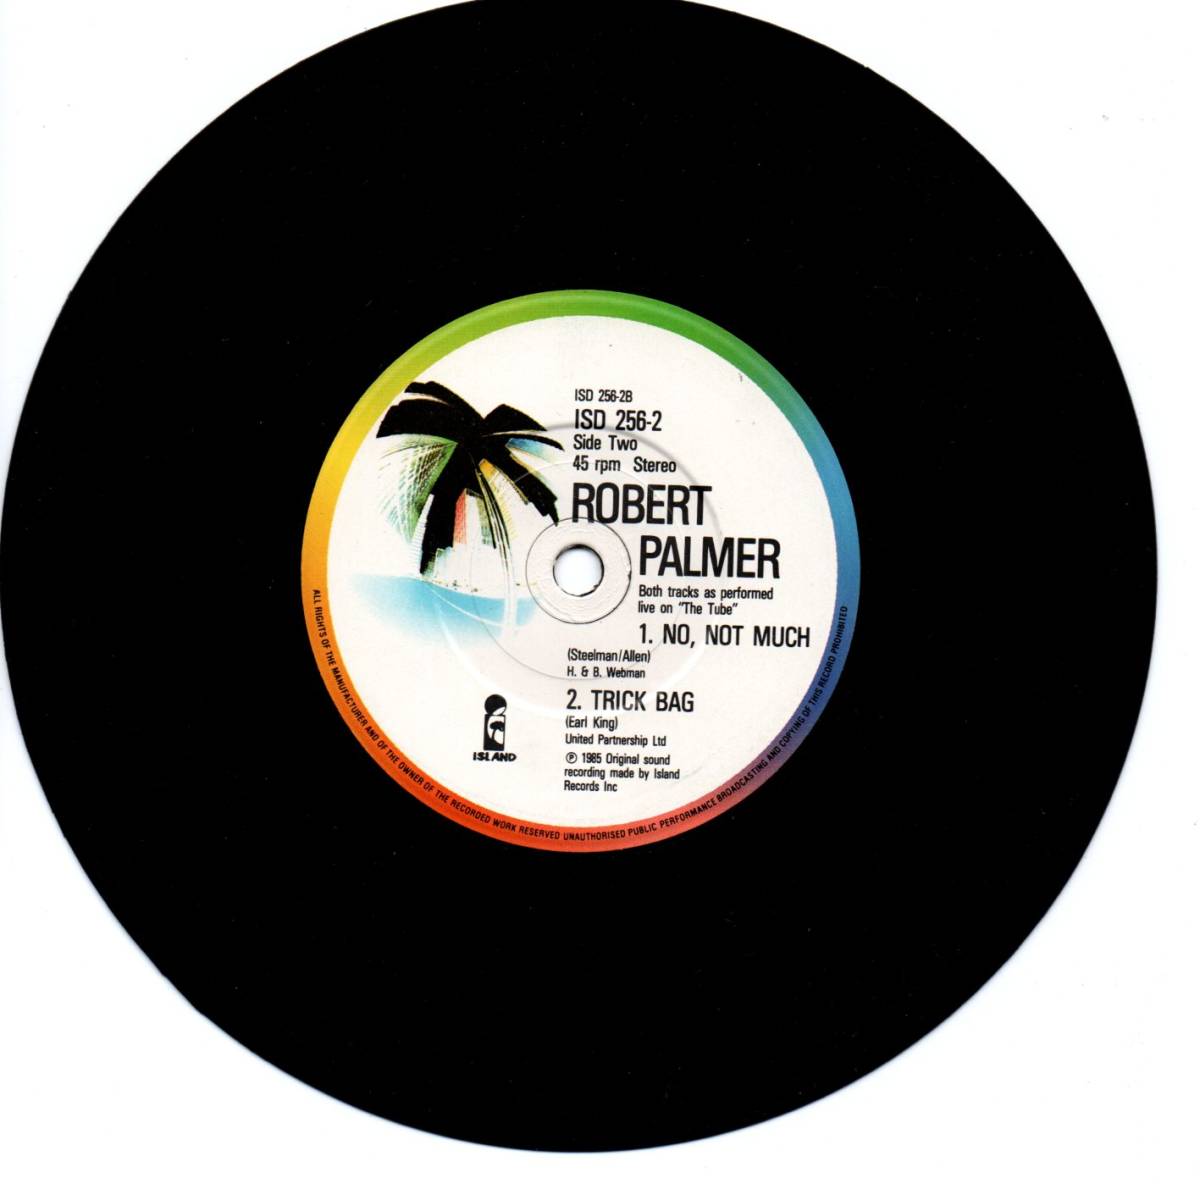 Robert Palmer 「Riptide/ Back In My Arms/ Johnny And Mary/ No, Not Much/ Trcik Bag」英国盤2枚組EPレコード_画像5